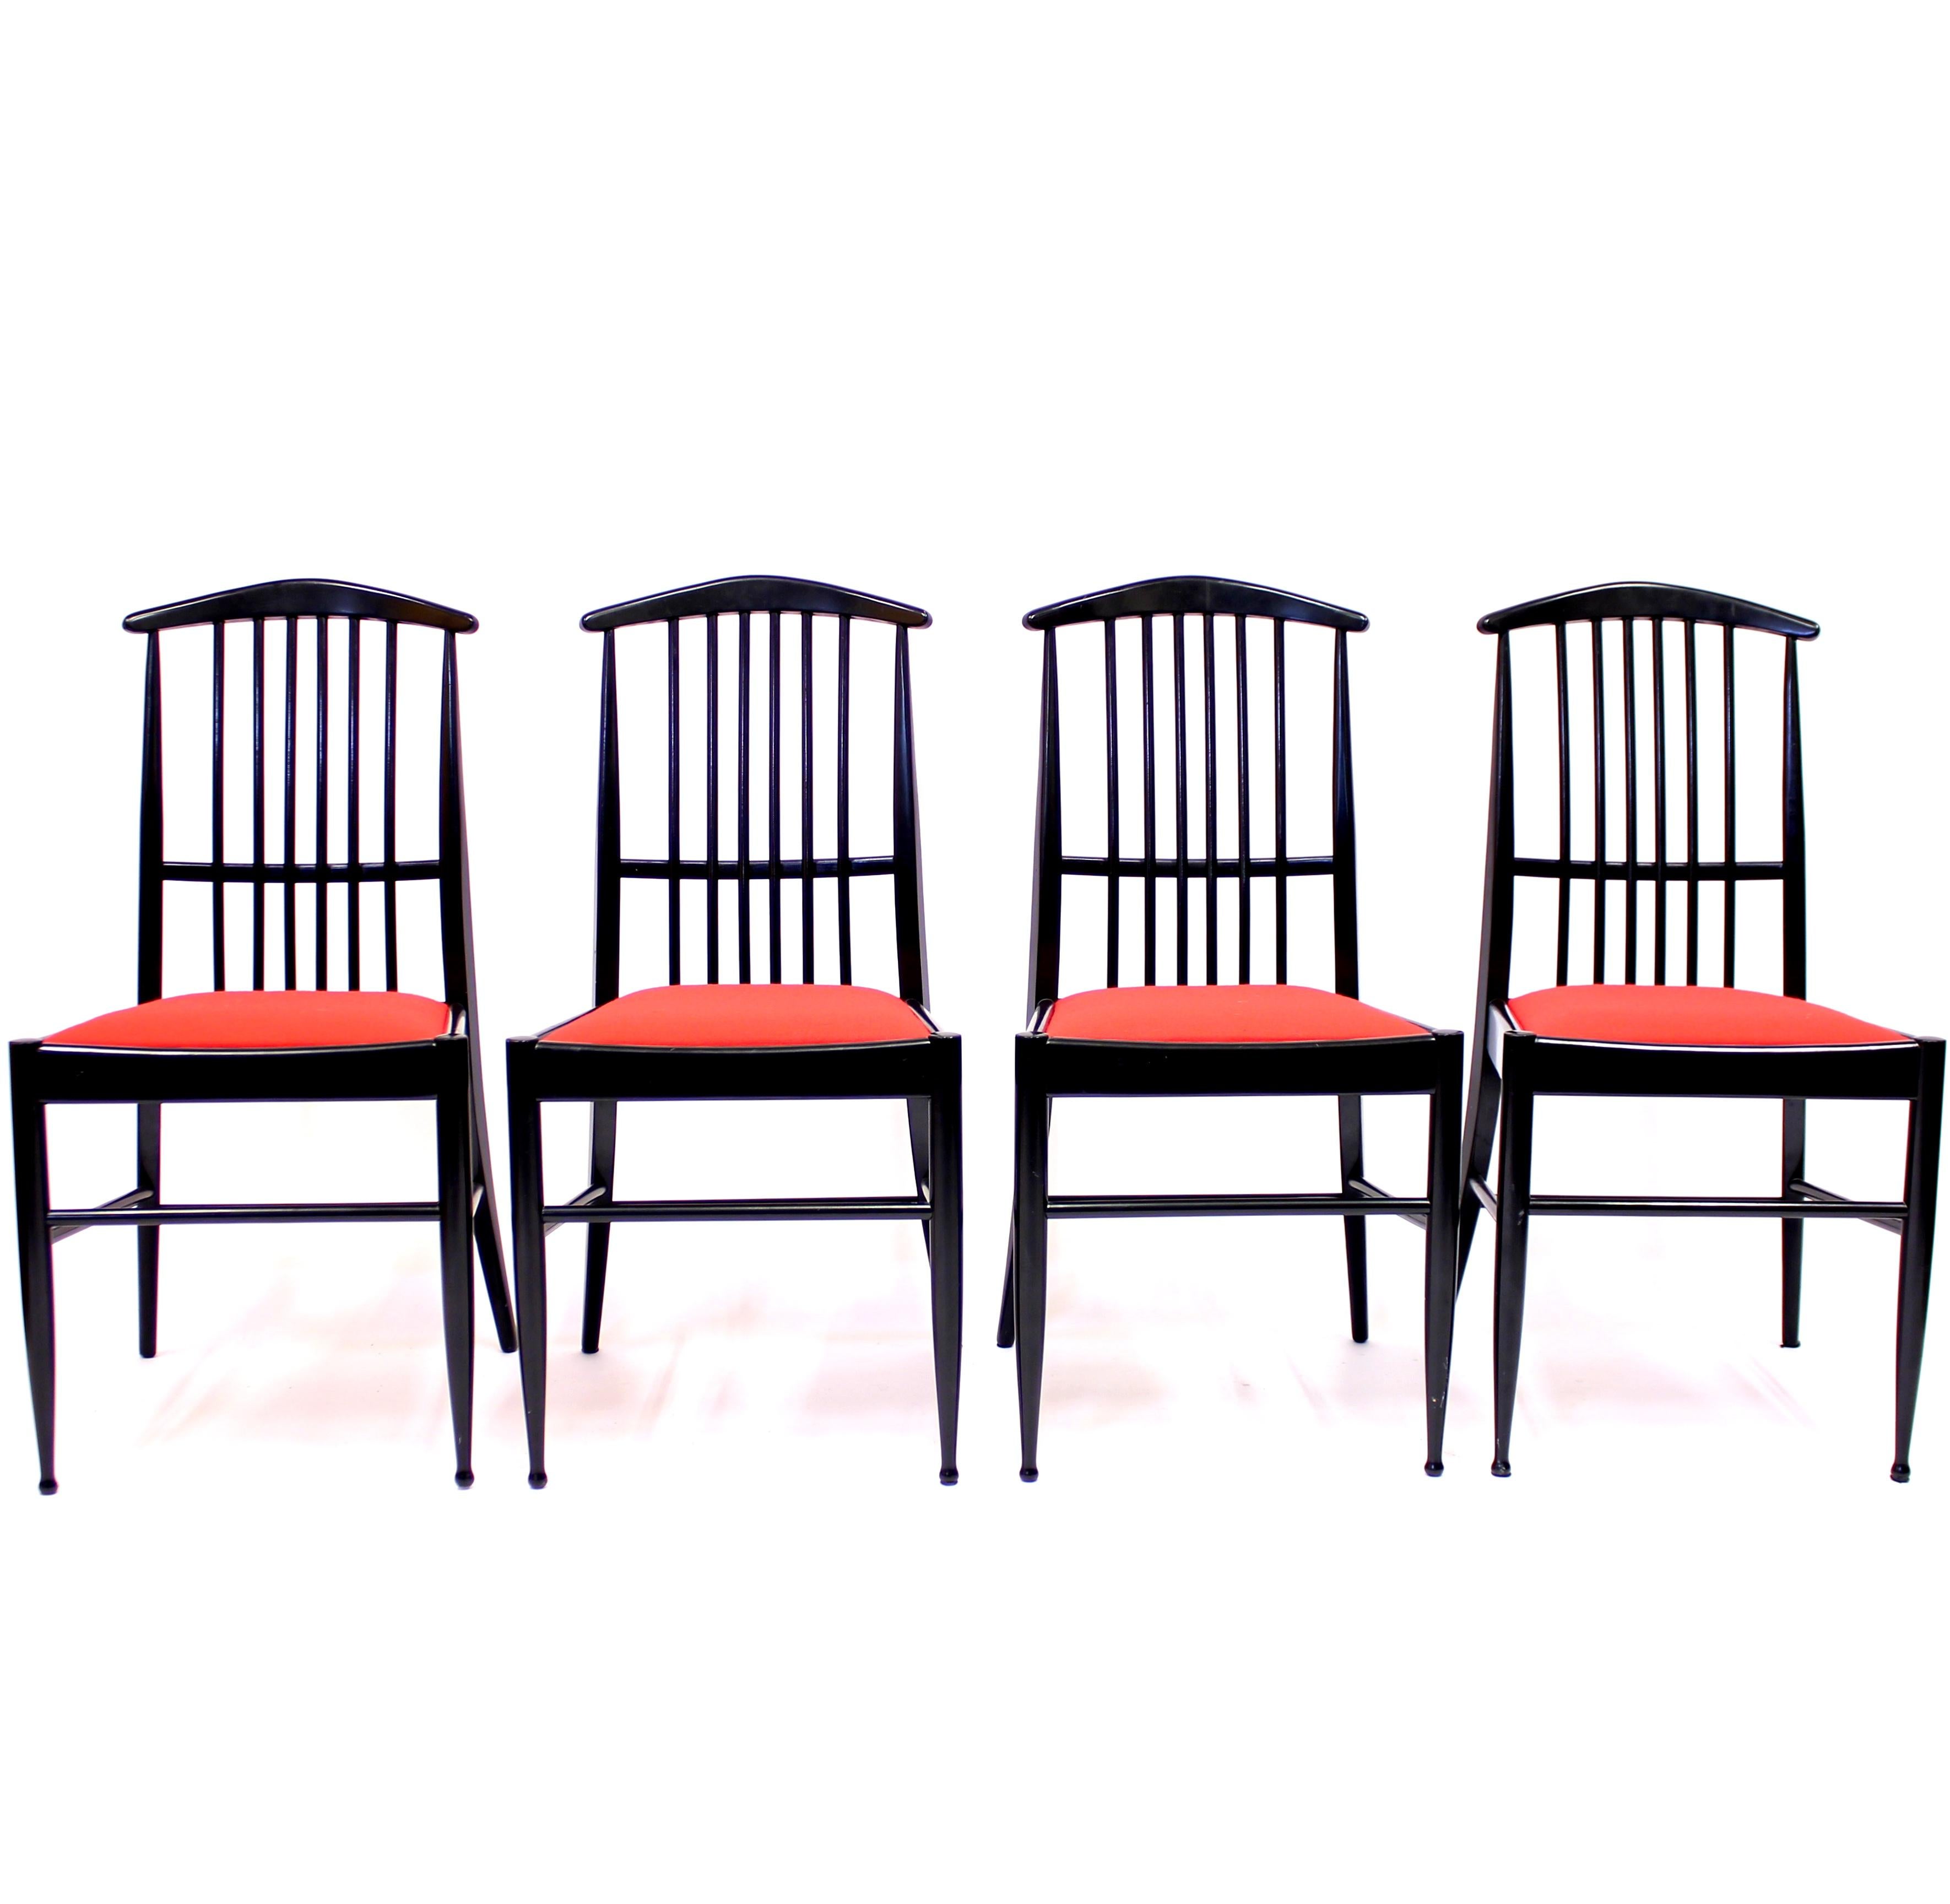 Finnish Kerstin Hörlin-Holmquist, set of 4 Charlotte dining chairs, ASKO, 1970s For Sale